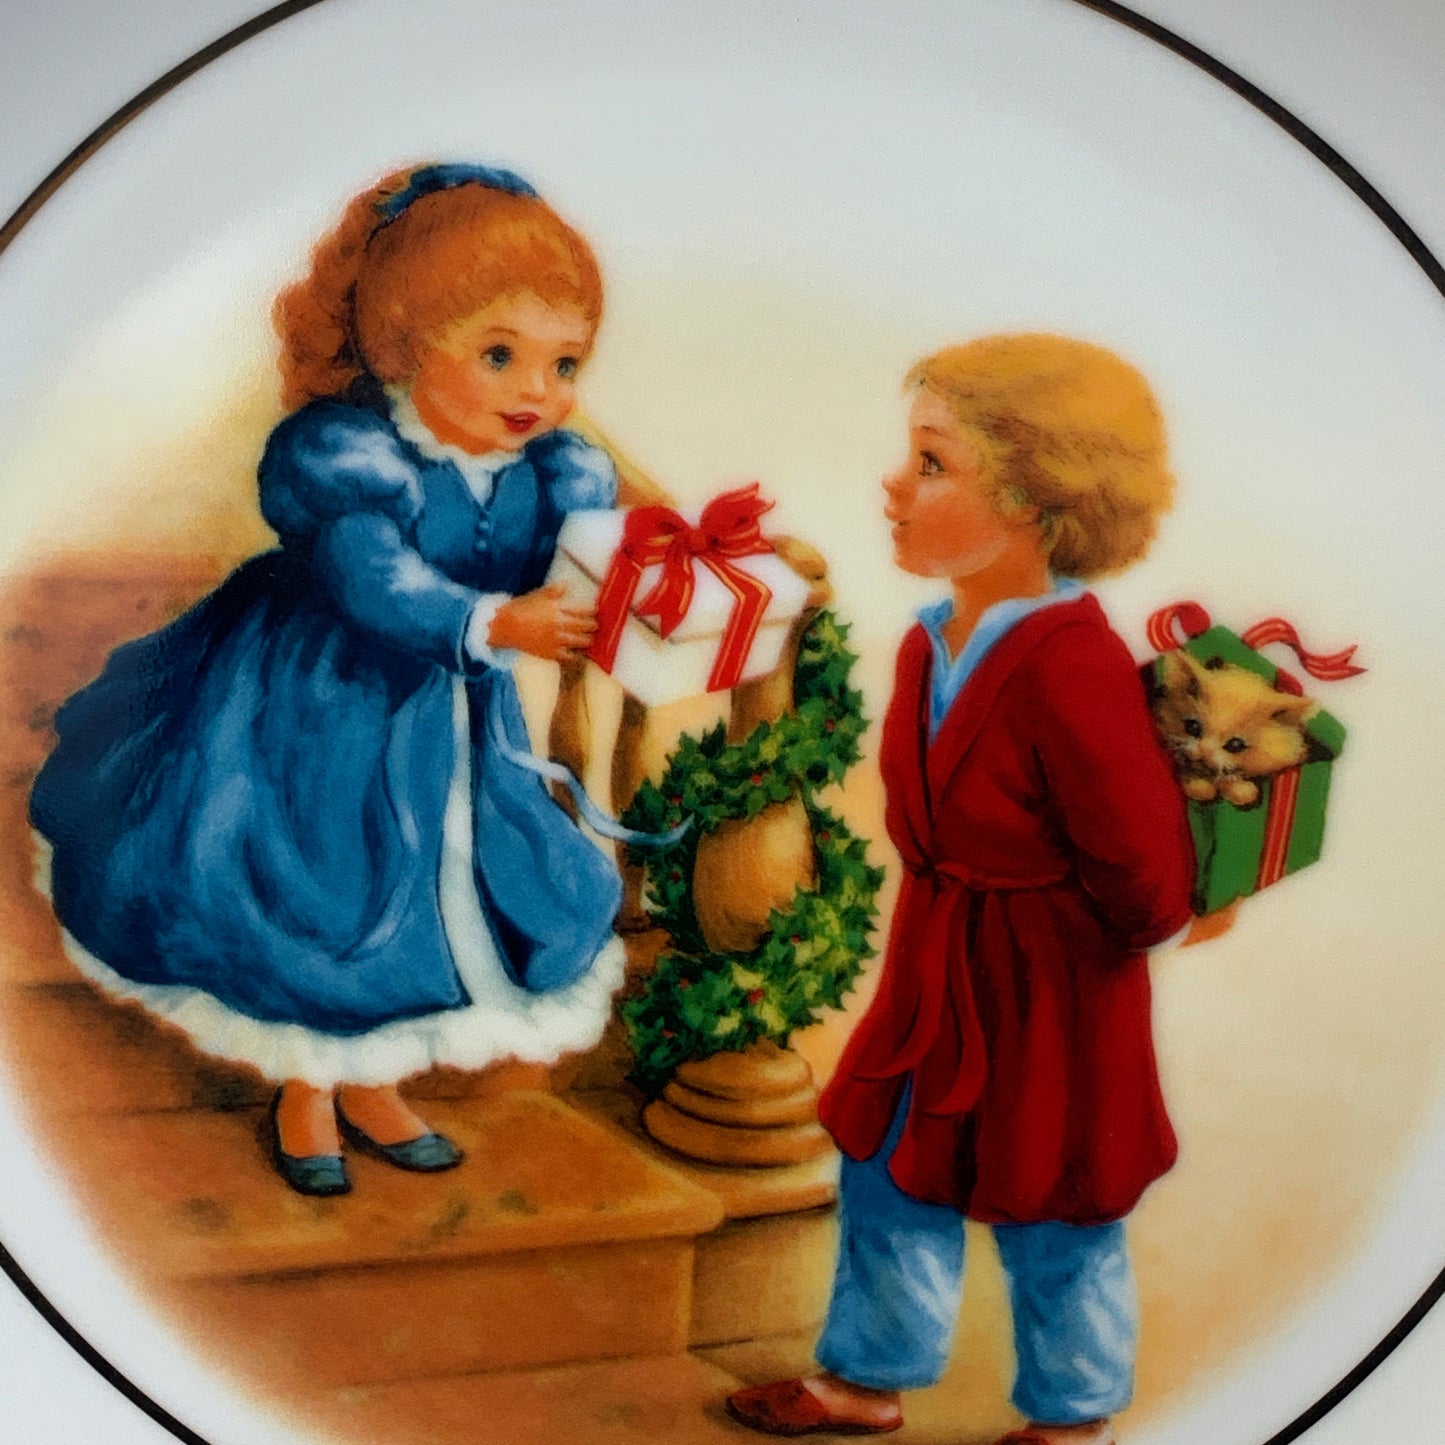 Avon Vintage Christmas Collector Plate Christmas Memories Fourth Edition Celebrating the Joy of Giving